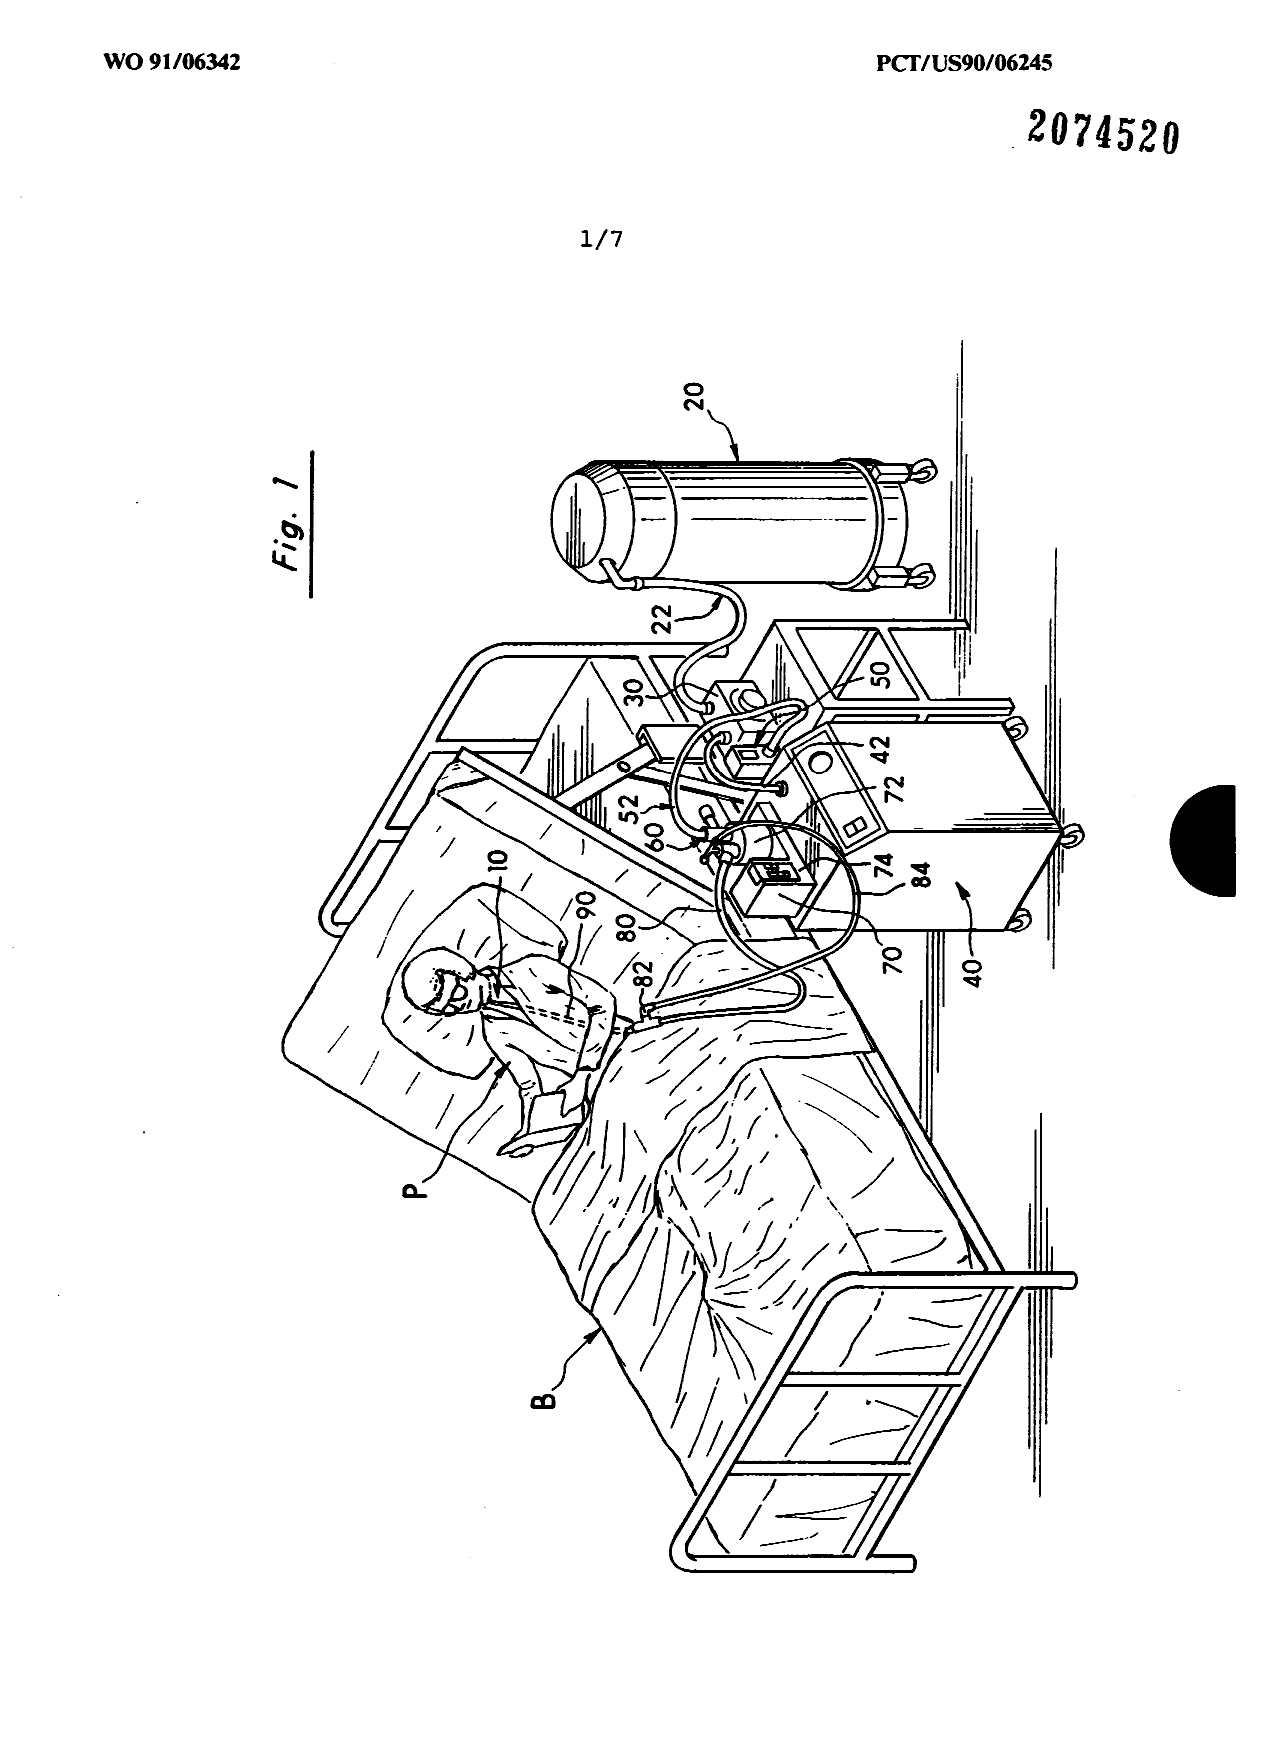 Canadian Patent Document 2074520. Drawings 19950214. Image 1 of 7